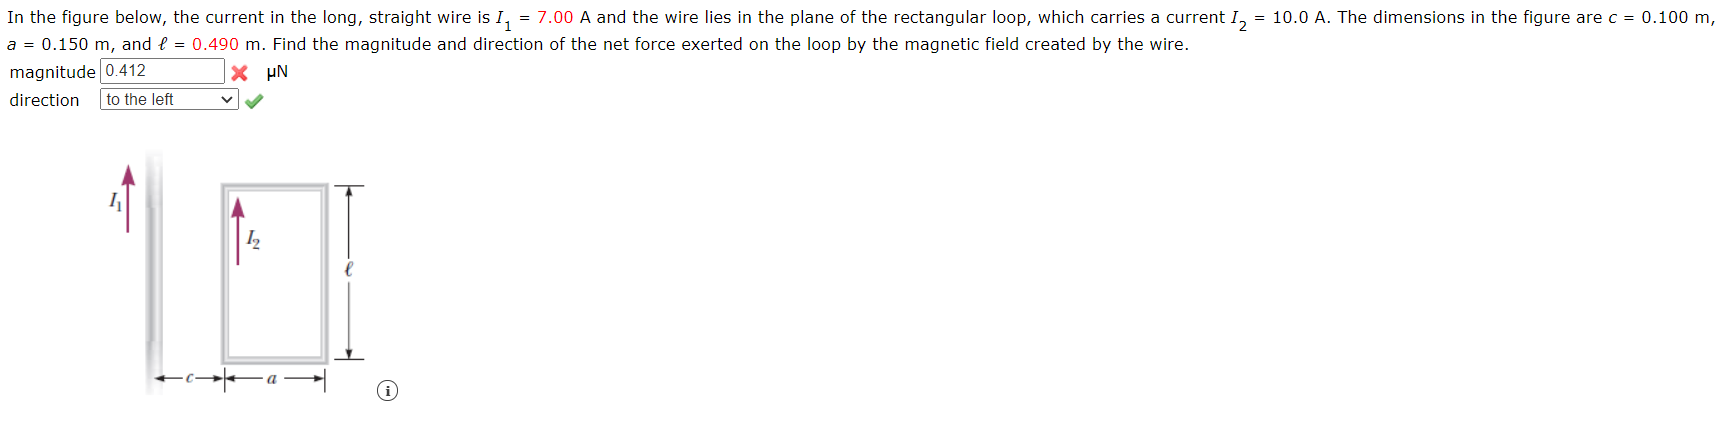 In the figure below, the current in the long, straight wire is I, = 7.00 A and the wire lies in the plane of the rectangular loop, which carries a current I, = 10.0 A. The dimensions in the figure are c = 0.100 m,
a = 0.150 m, and e = 0.490 m. Find the magnitude and direction of the net force exerted on the loop by the magnetic field created by the wire.
magnitude 0.412
X µN
direction
to the left
